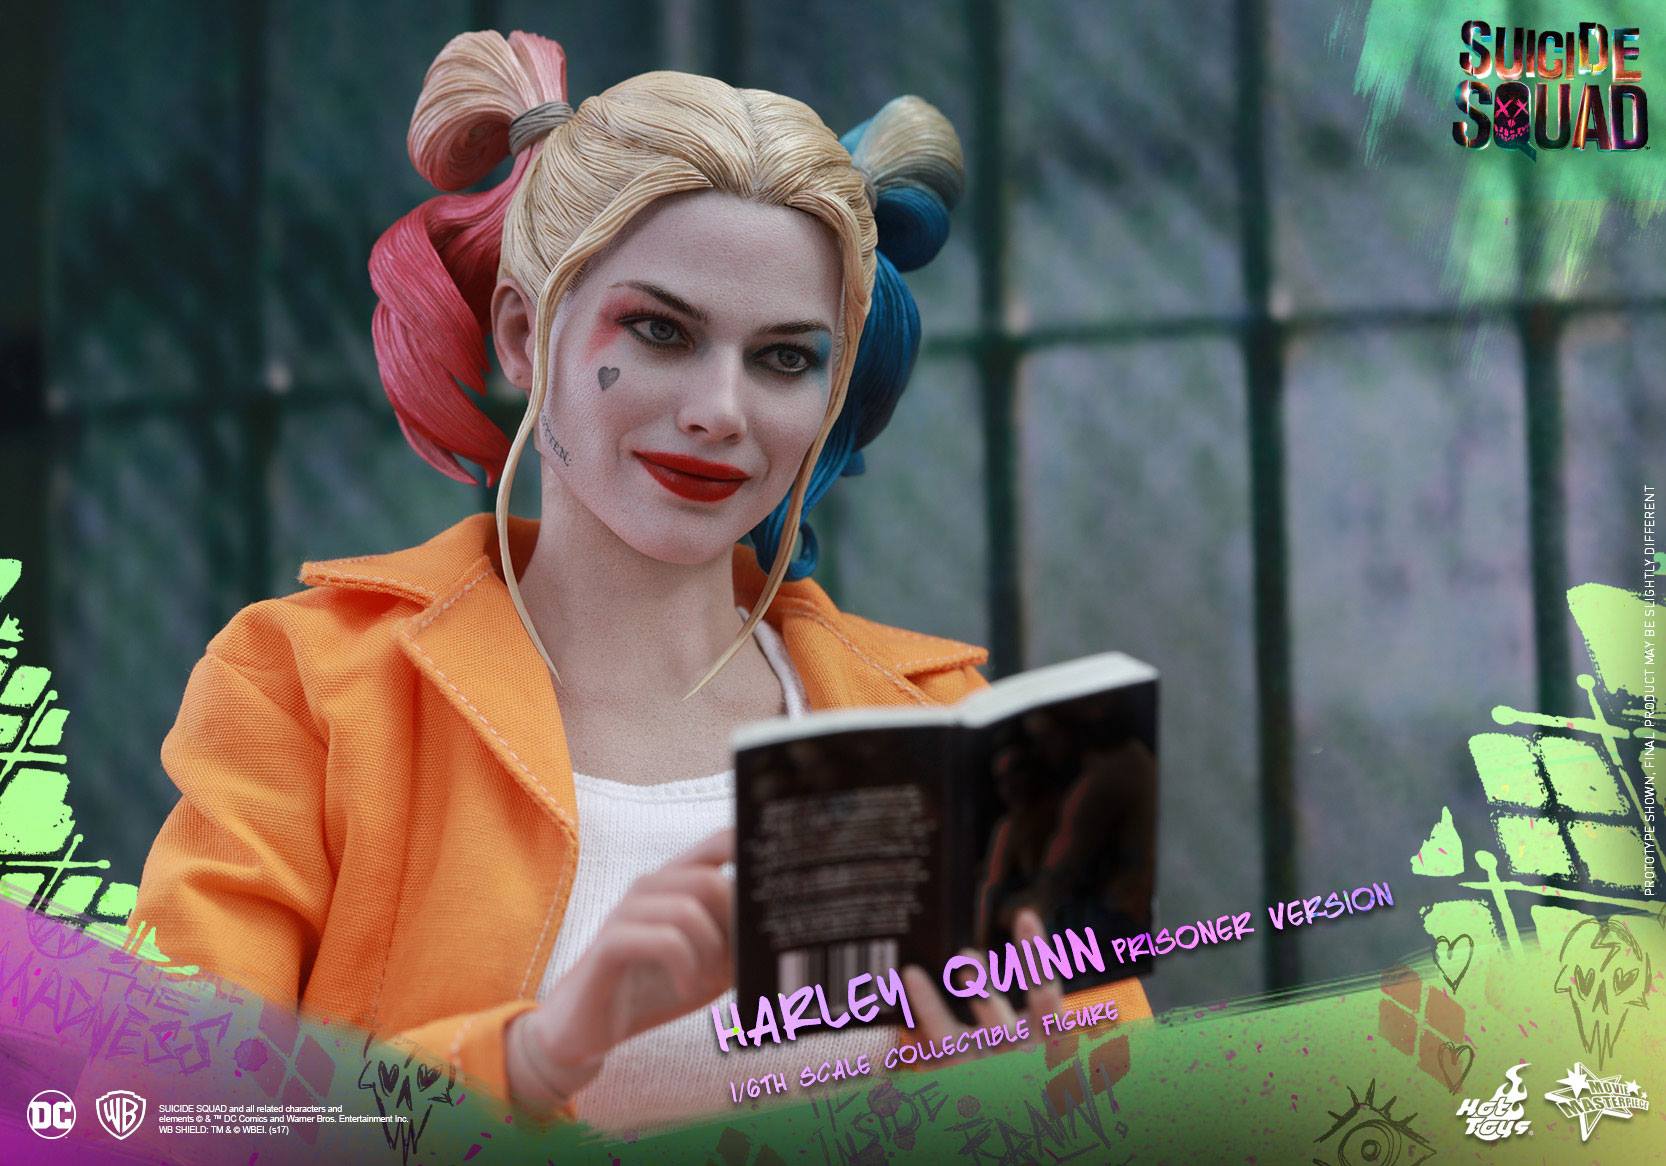 1/6 Harley Quinn head 2.0 Prison version Suicide Squad for Phicen verycool ❶USA❶ 